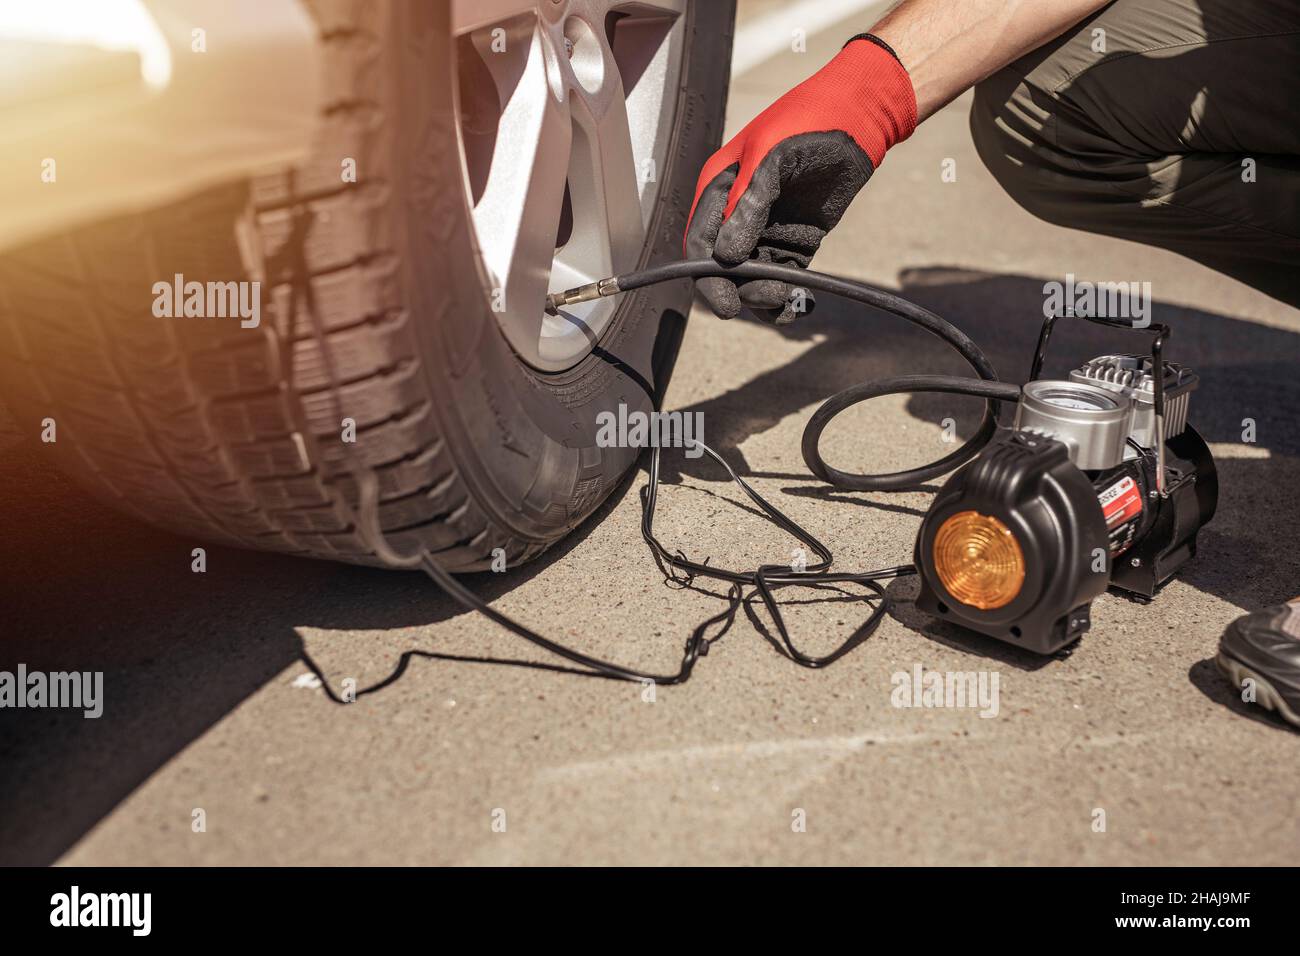 Tire pump inflating car wheel. Tyre inflator in male hands, checking pressure. Stock Photo